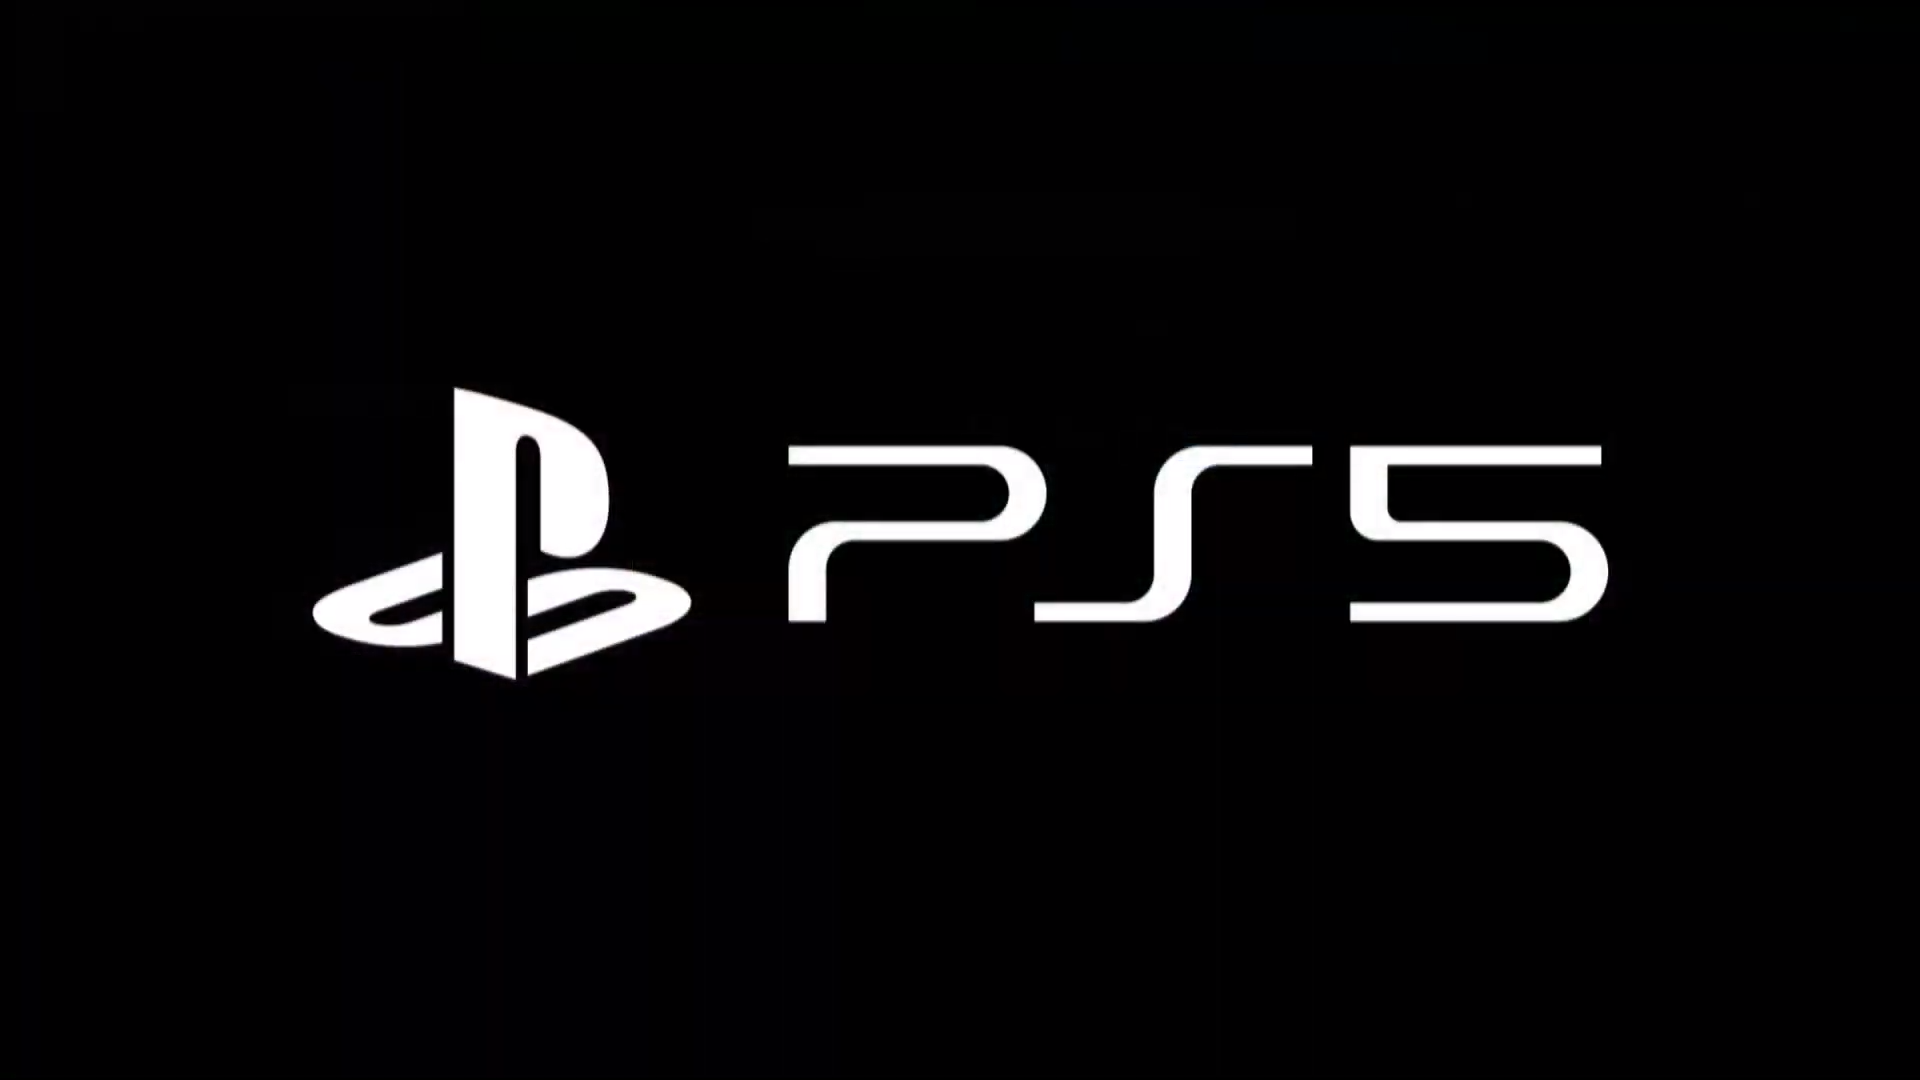 Sony revealed the PS5 (logo) at CES 2020